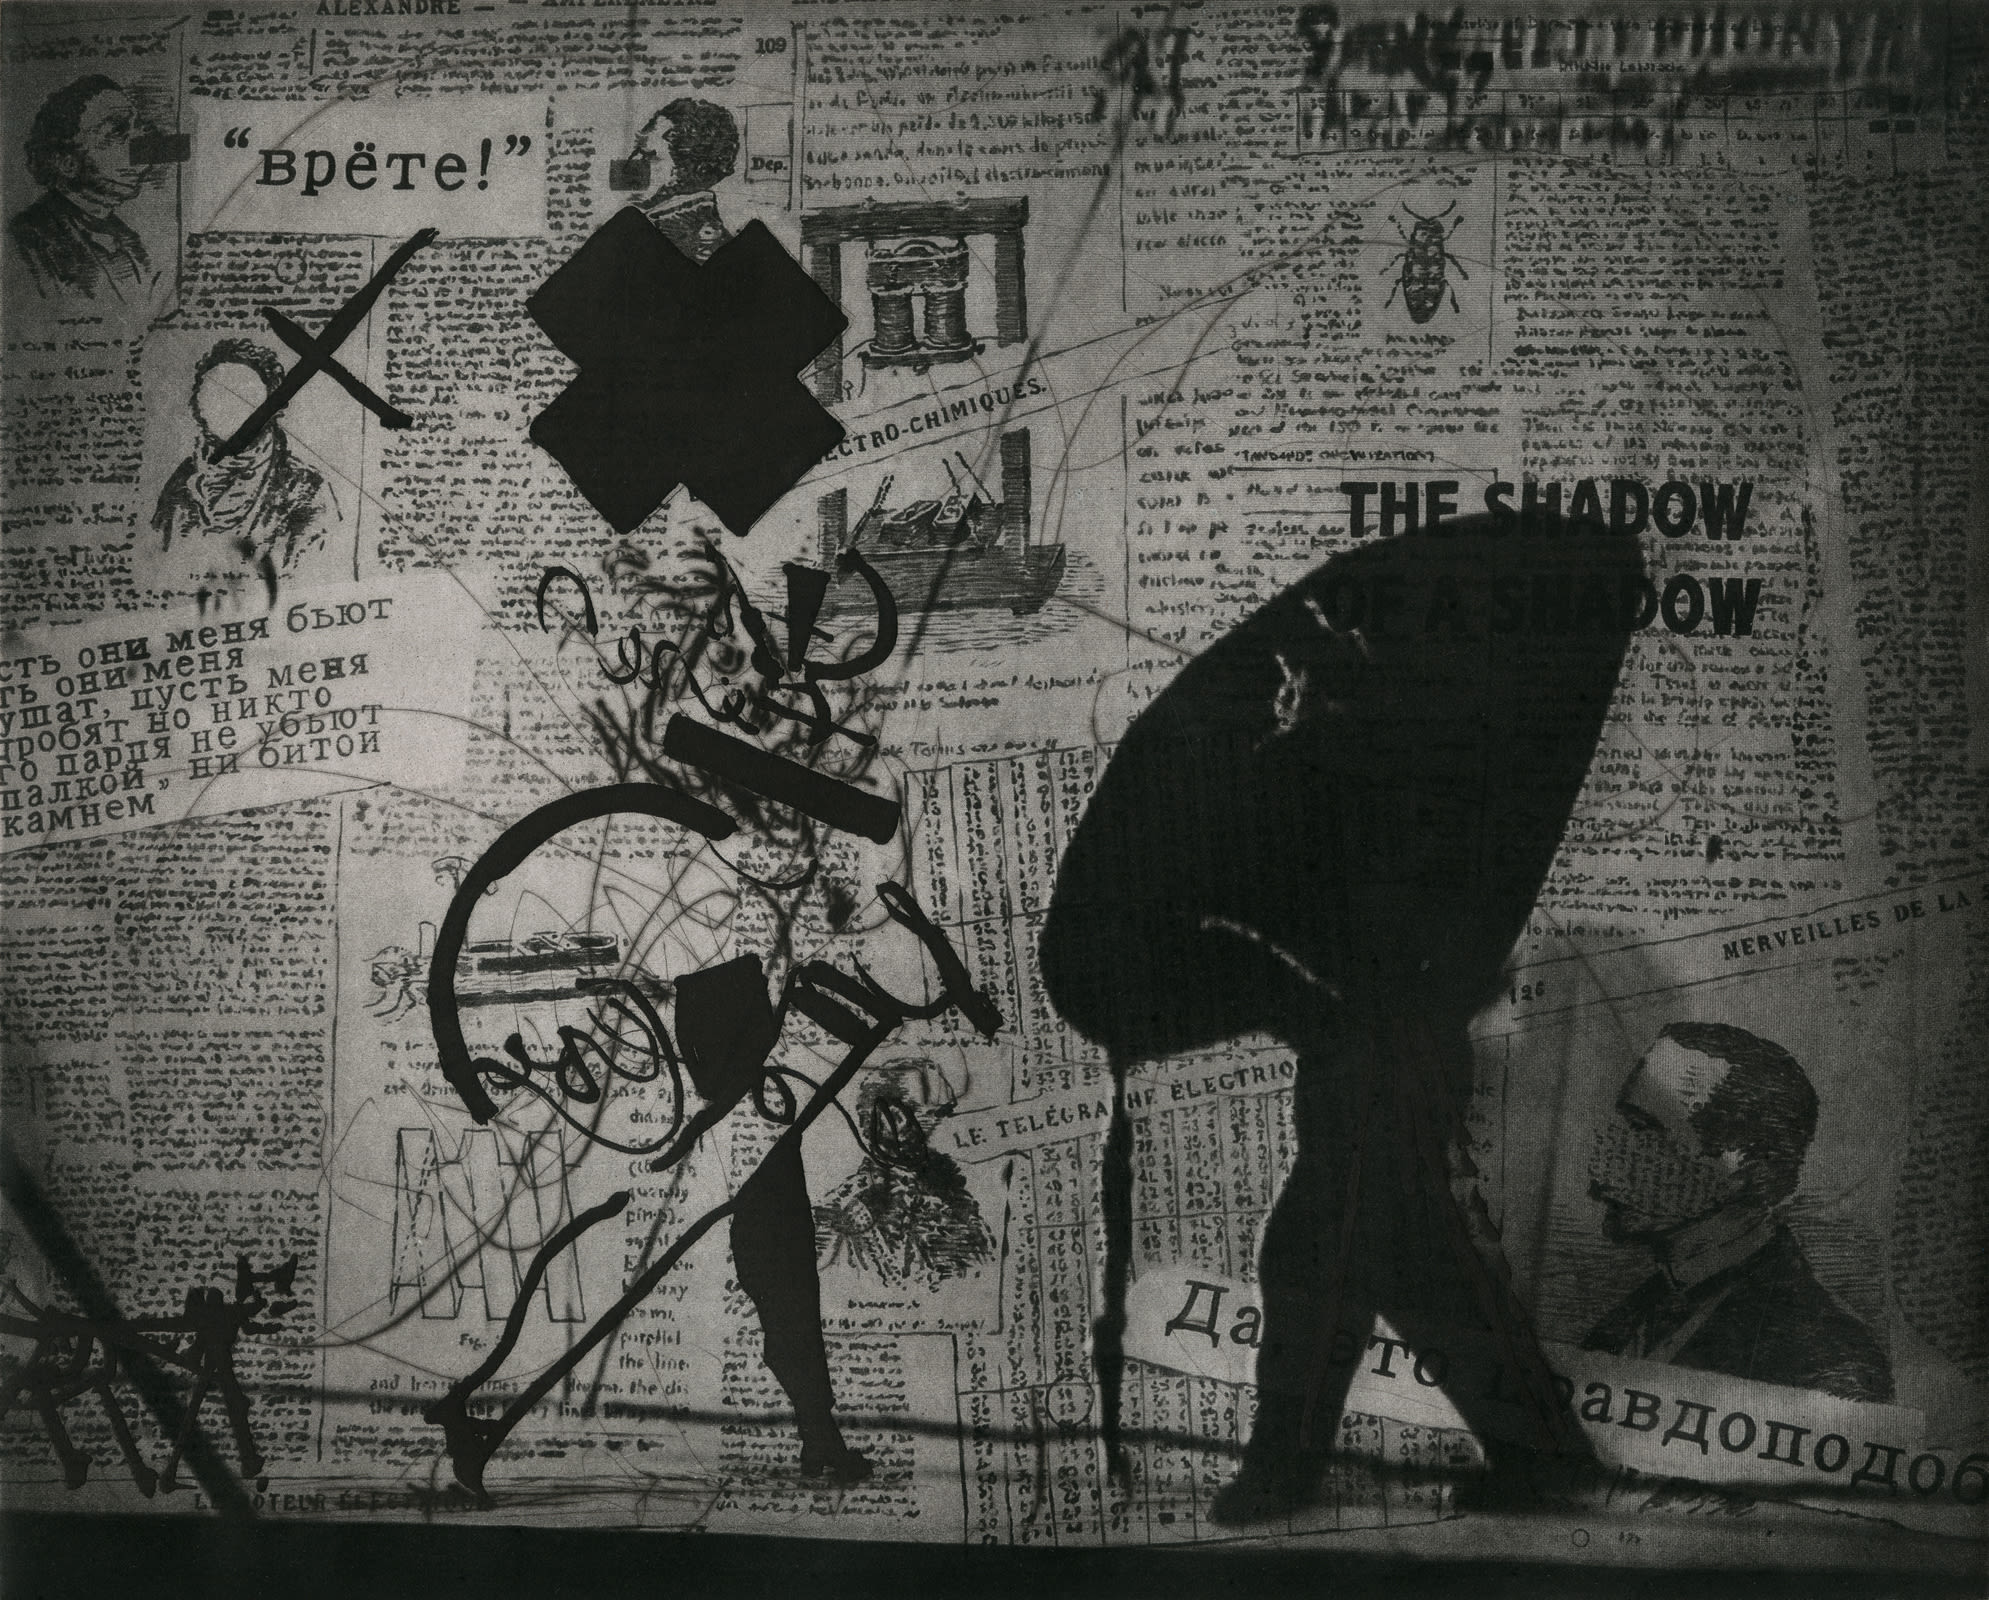 William Kentridge, Nose projection with walking woman, 2010